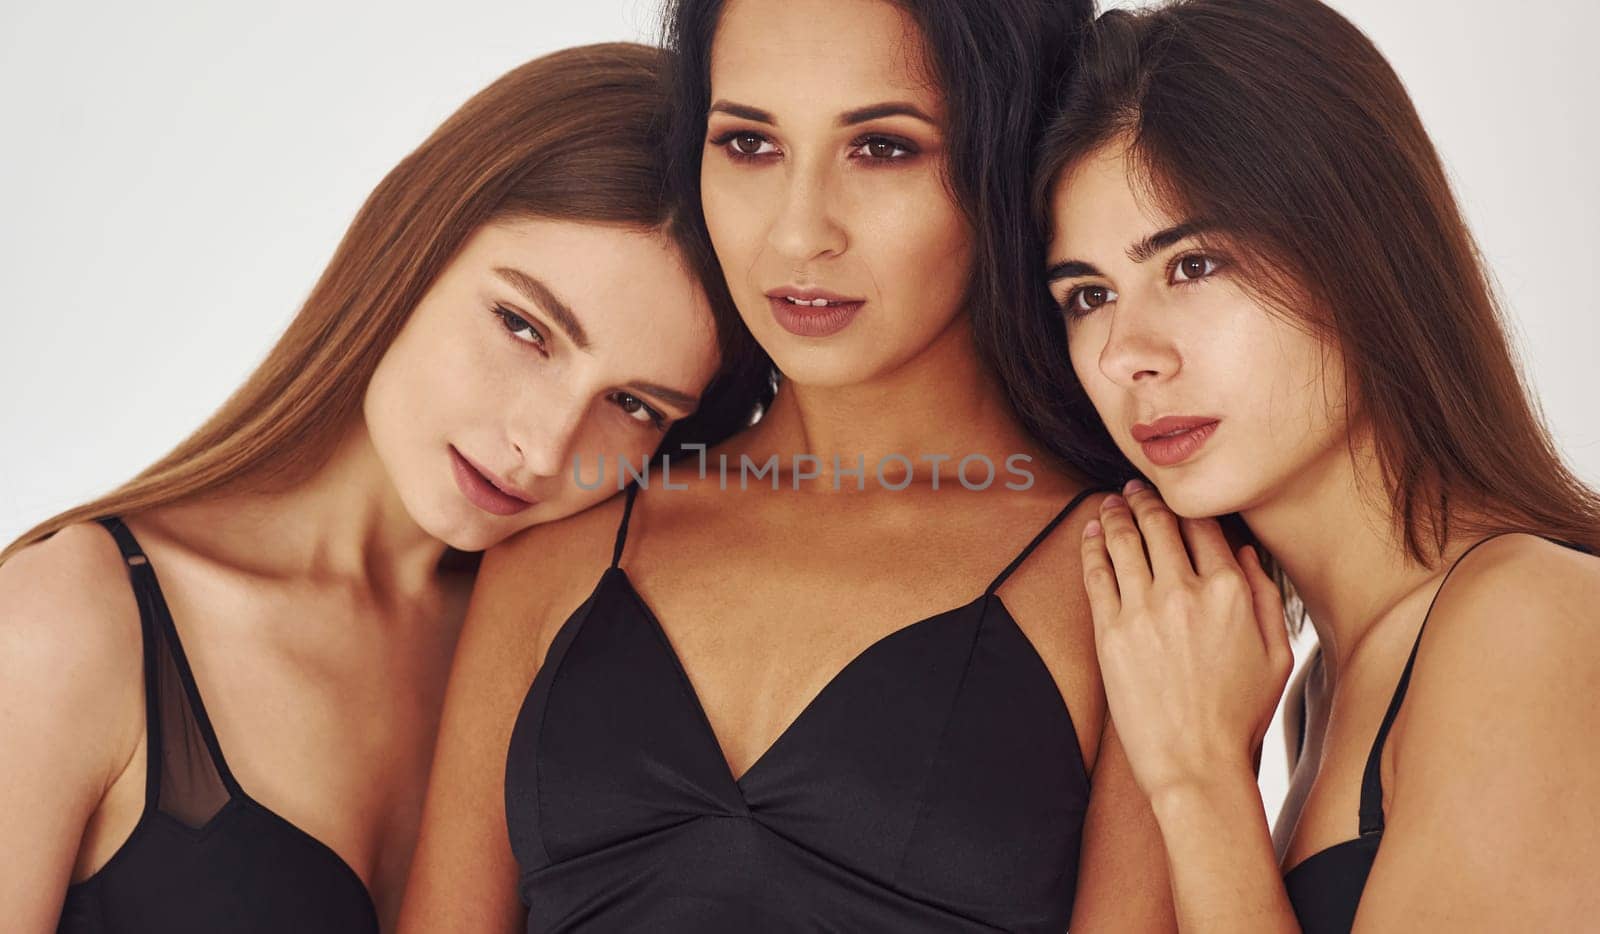 Three young women in lingerie together indoors. White background.